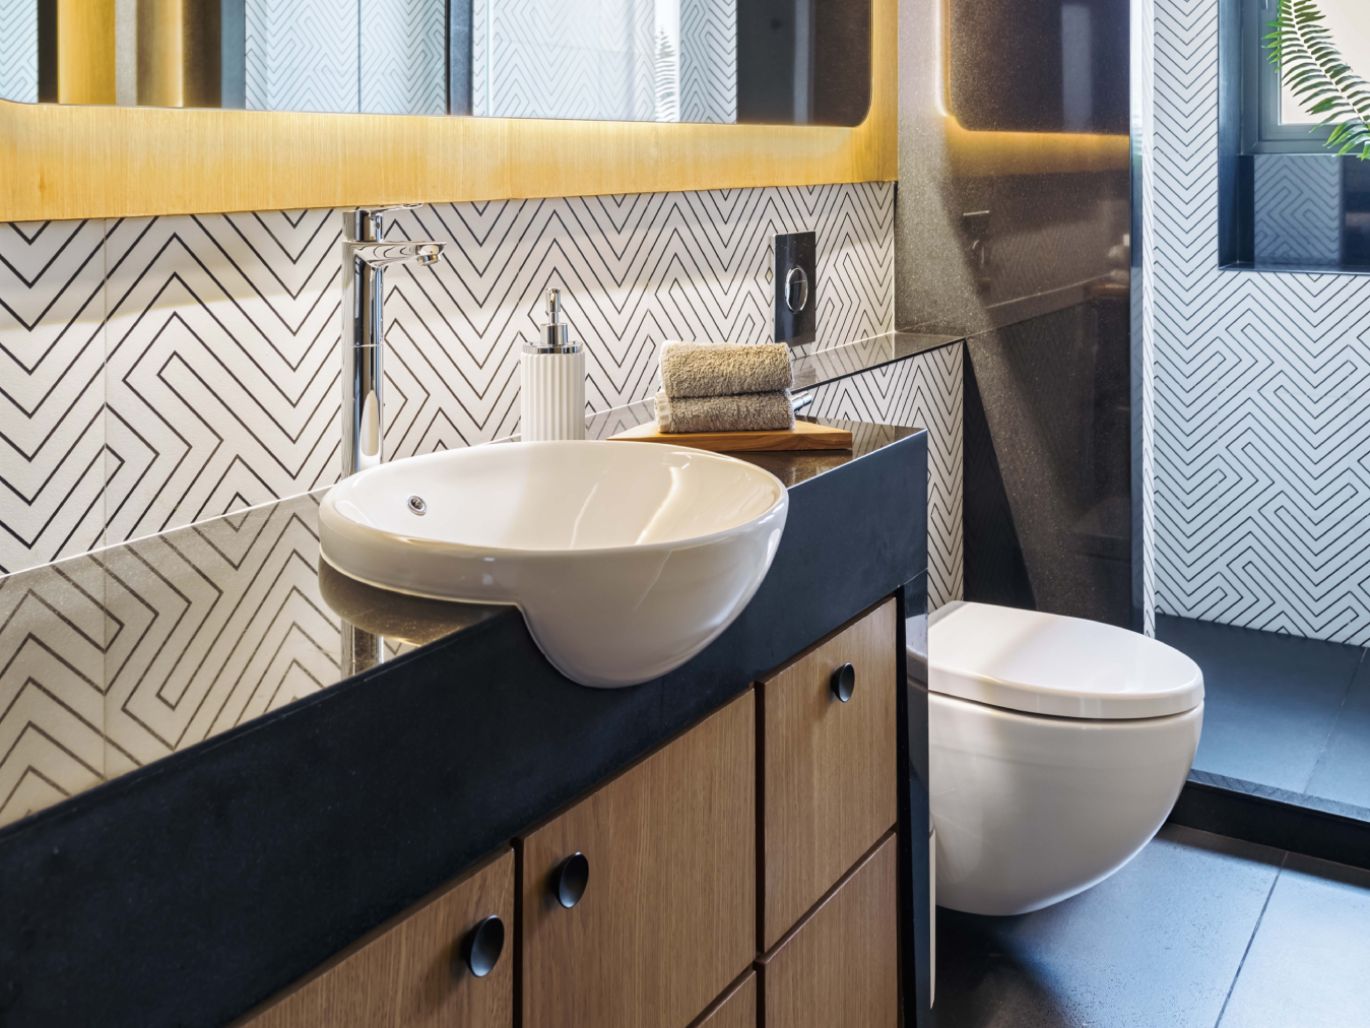 Ergonomic and playful experience crafted by Kohler